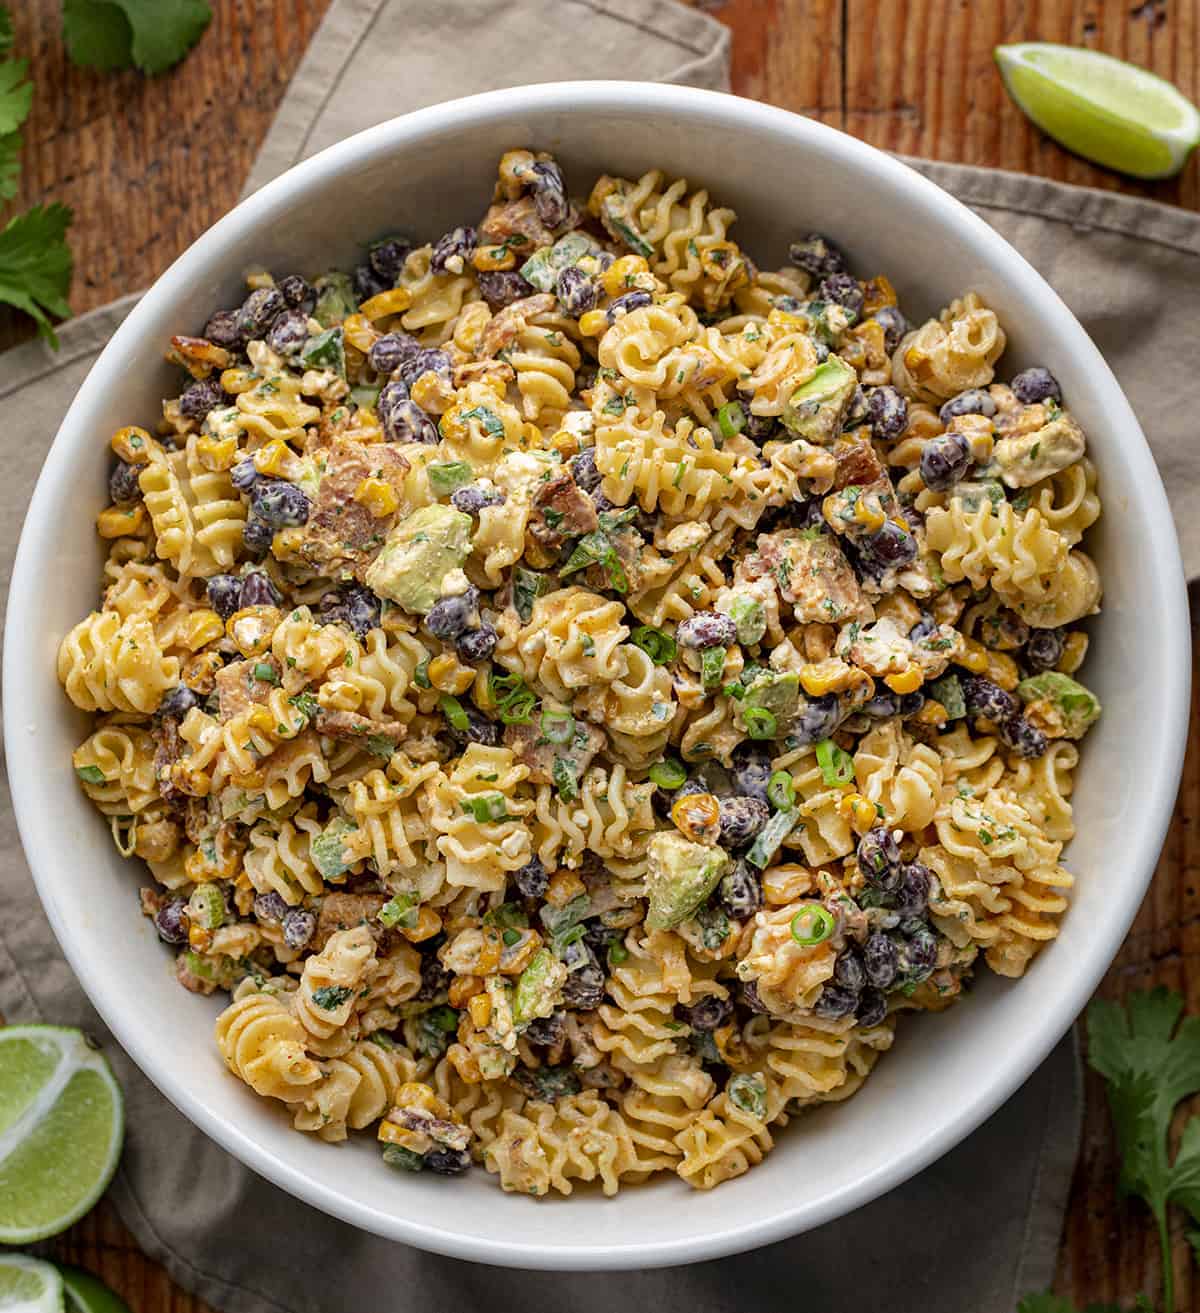 Bowl of Corn Pasta Salad from Overhead on a Cutting Board